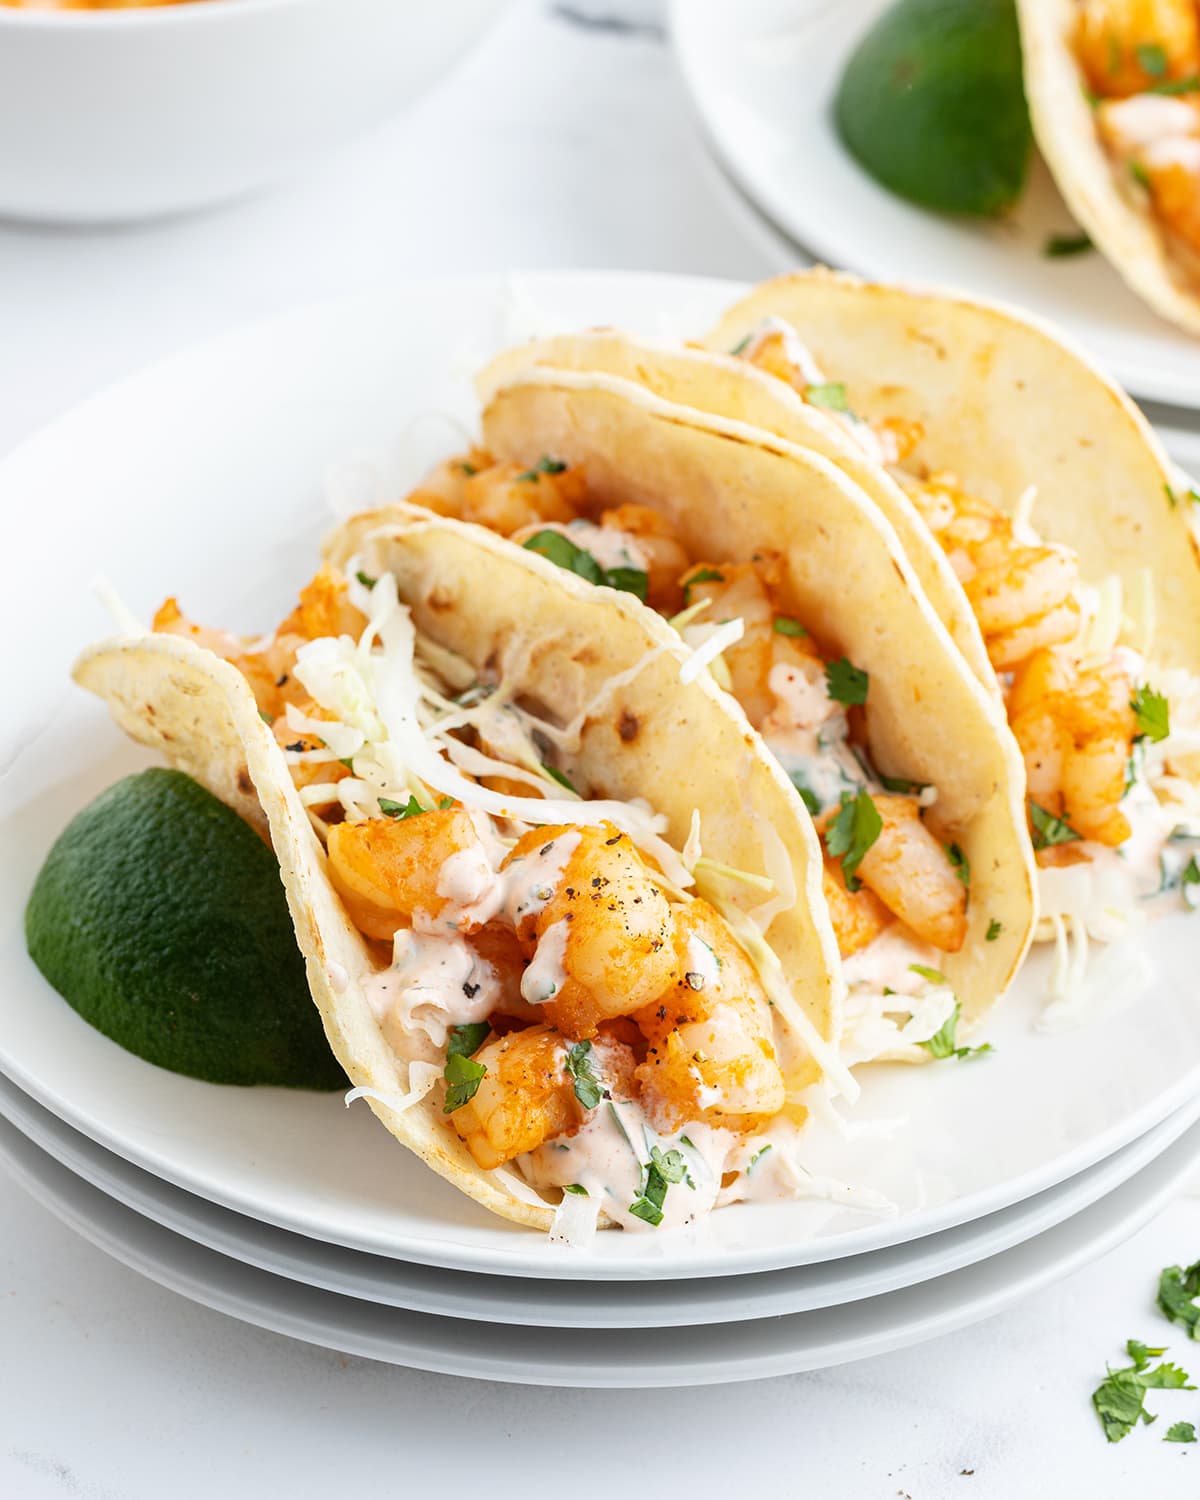 A plate of shrimp tacos topped with slaw and cilantro lime yogurt sauce.